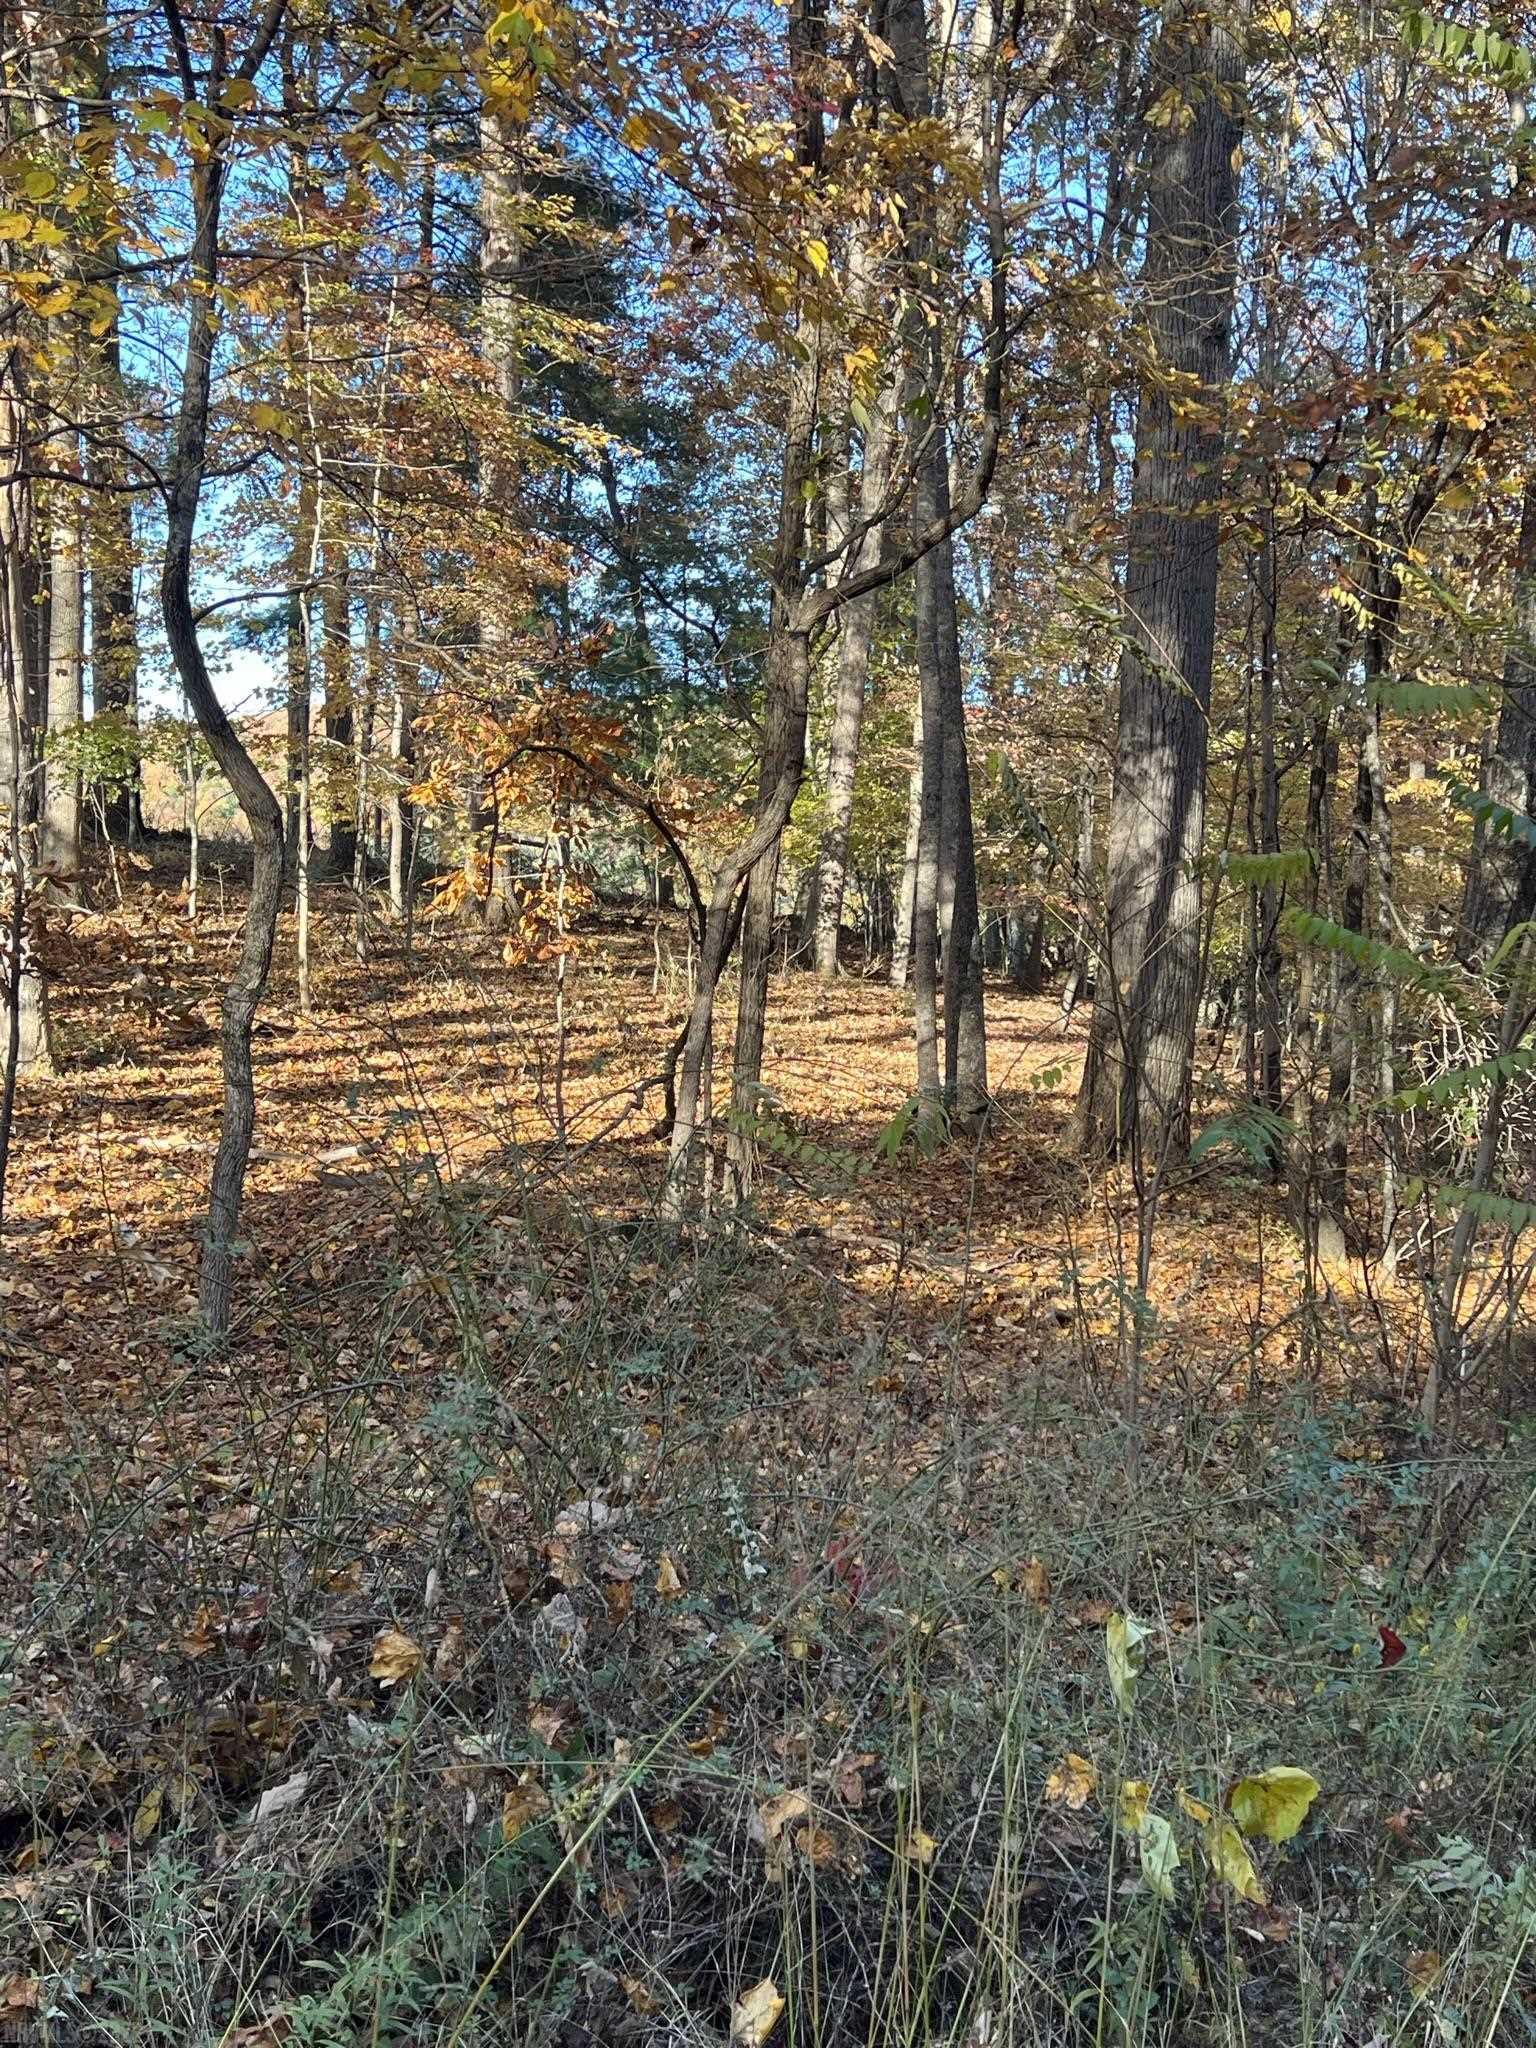 Looking for that piece of land that is tucked away but not too far away? lays well, and is easy to get to? Here it is, this five and a half acres nestled in the valley of the Blue Ridge Mountains has several home sites perfect for building that cabin in the woods or contempory style home you've been dreaming of. This land has road frontage on Drifty Ln, just a few miles from the town of Wytheville. This rolling wooded land is not steep and would be easy to set up permanent residence  Enjoy crisp mornings, refreshing your mind while living in a magical seclusion. If you're not looking to build but you're an outdoor enthusiasts, its always nice to own a piece of nature to enjoy the many outdoor activities. Less than 15 minutes to Wytheville, less than 30 minutes to Elk Creek, Independence and Jefferson National Forest, check it out!